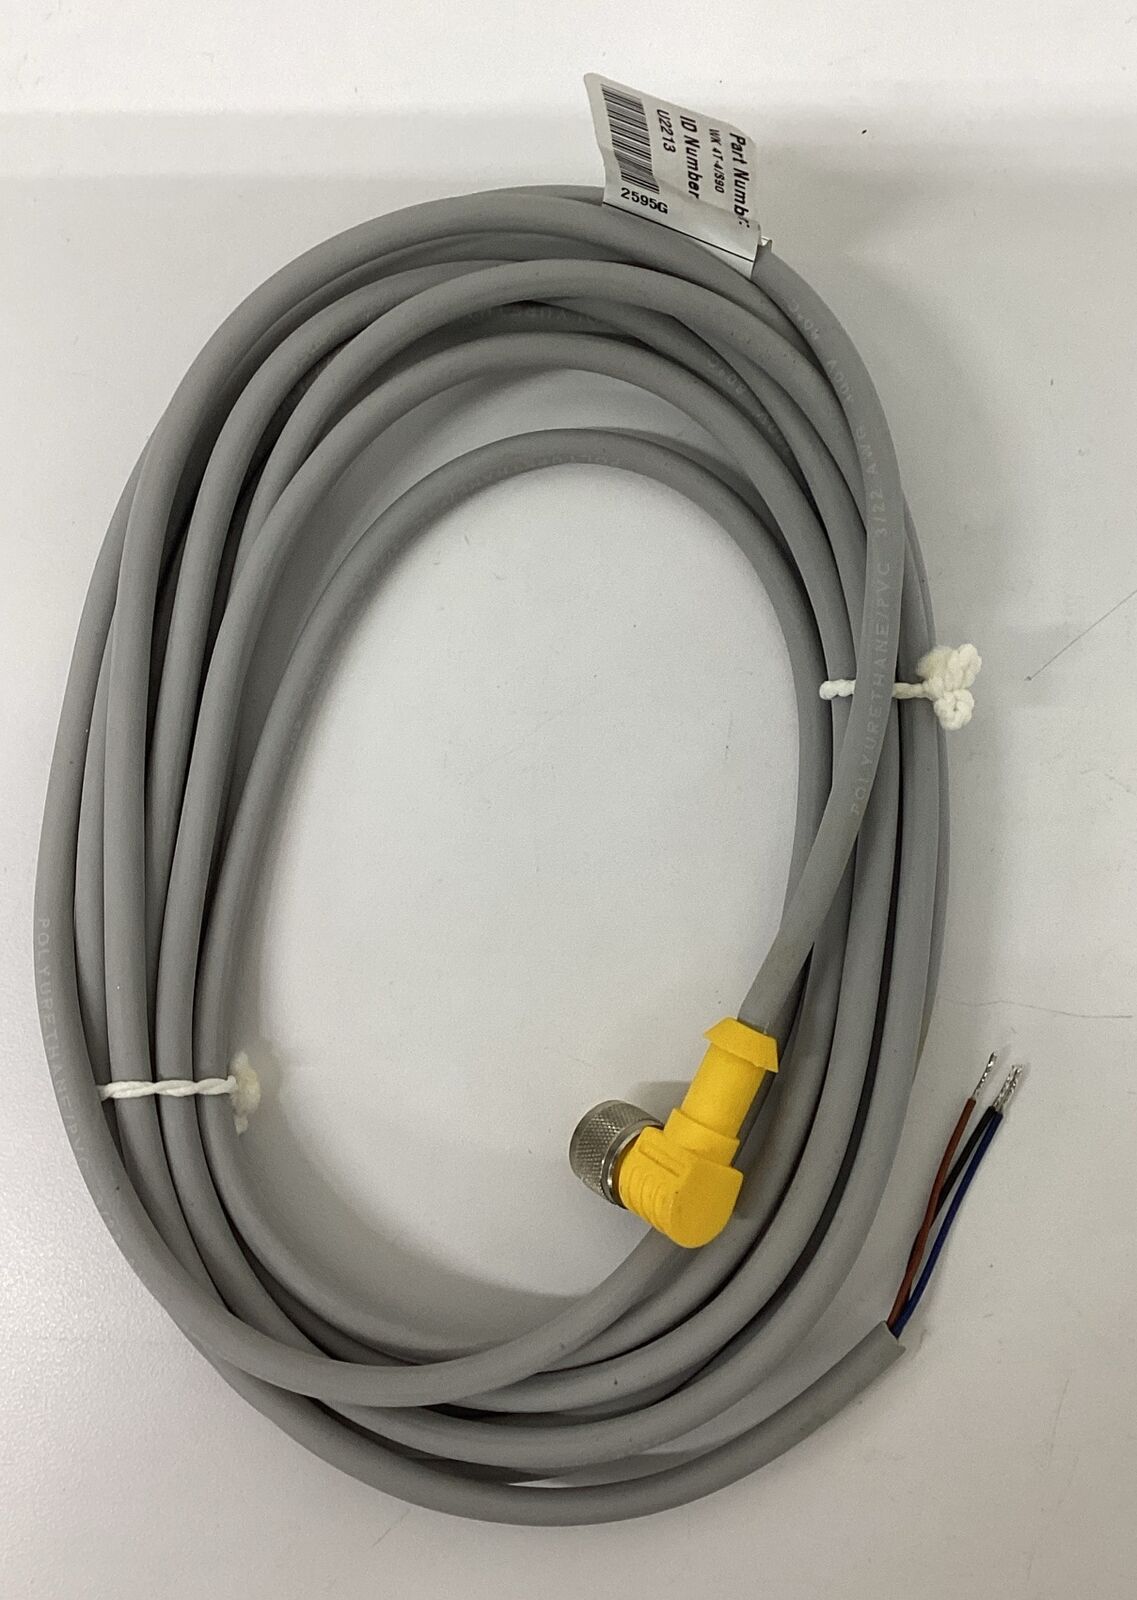 Turck WK4T-4/890 / U2213 M12 3-Wire Single End 90 Degree Cable 4M (RE150)